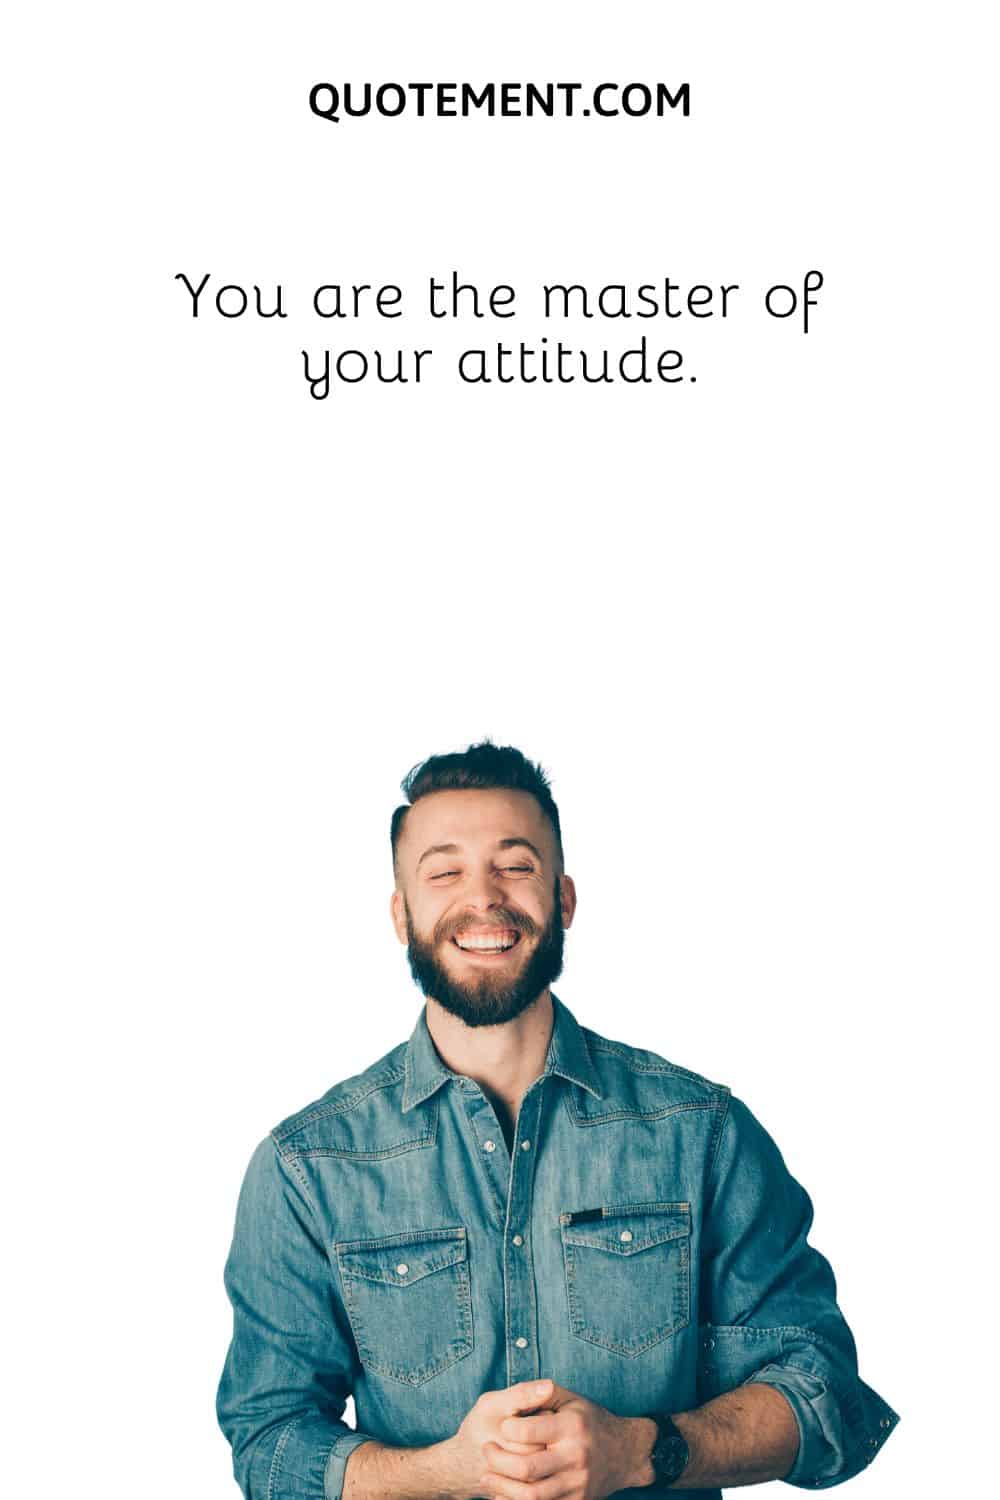 You are the master of your attitude